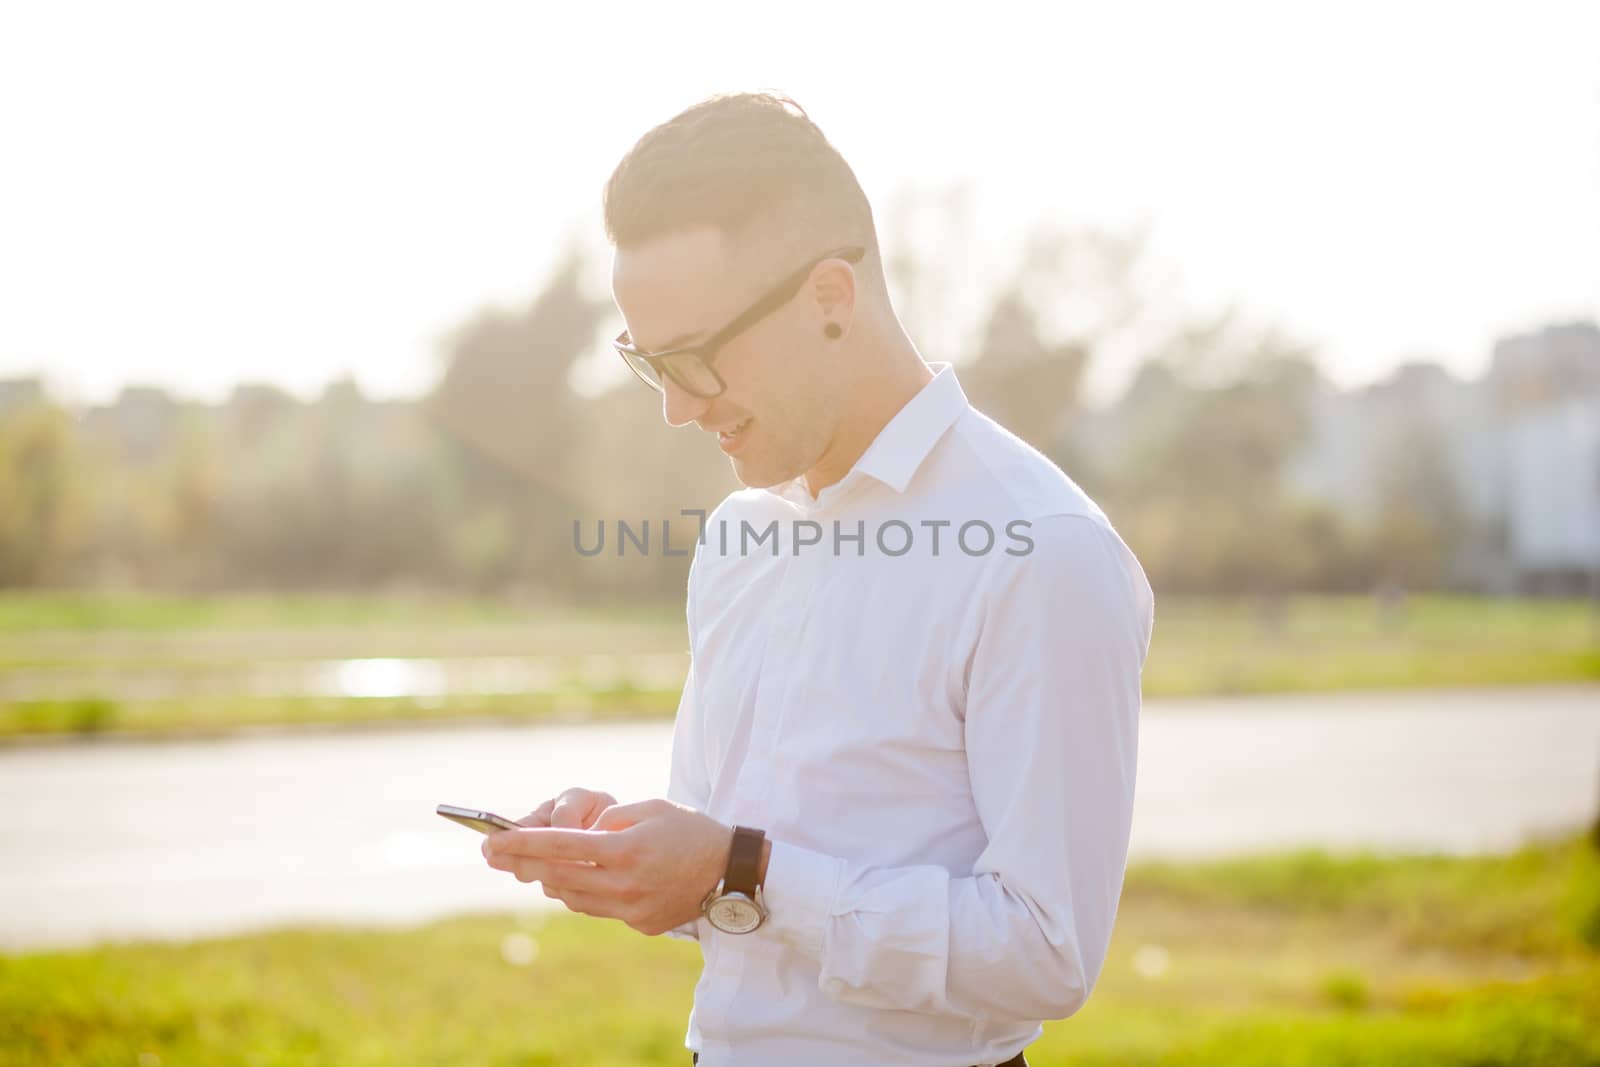 Man with glasses speak on mobile phone, In City, Urban Space, Park